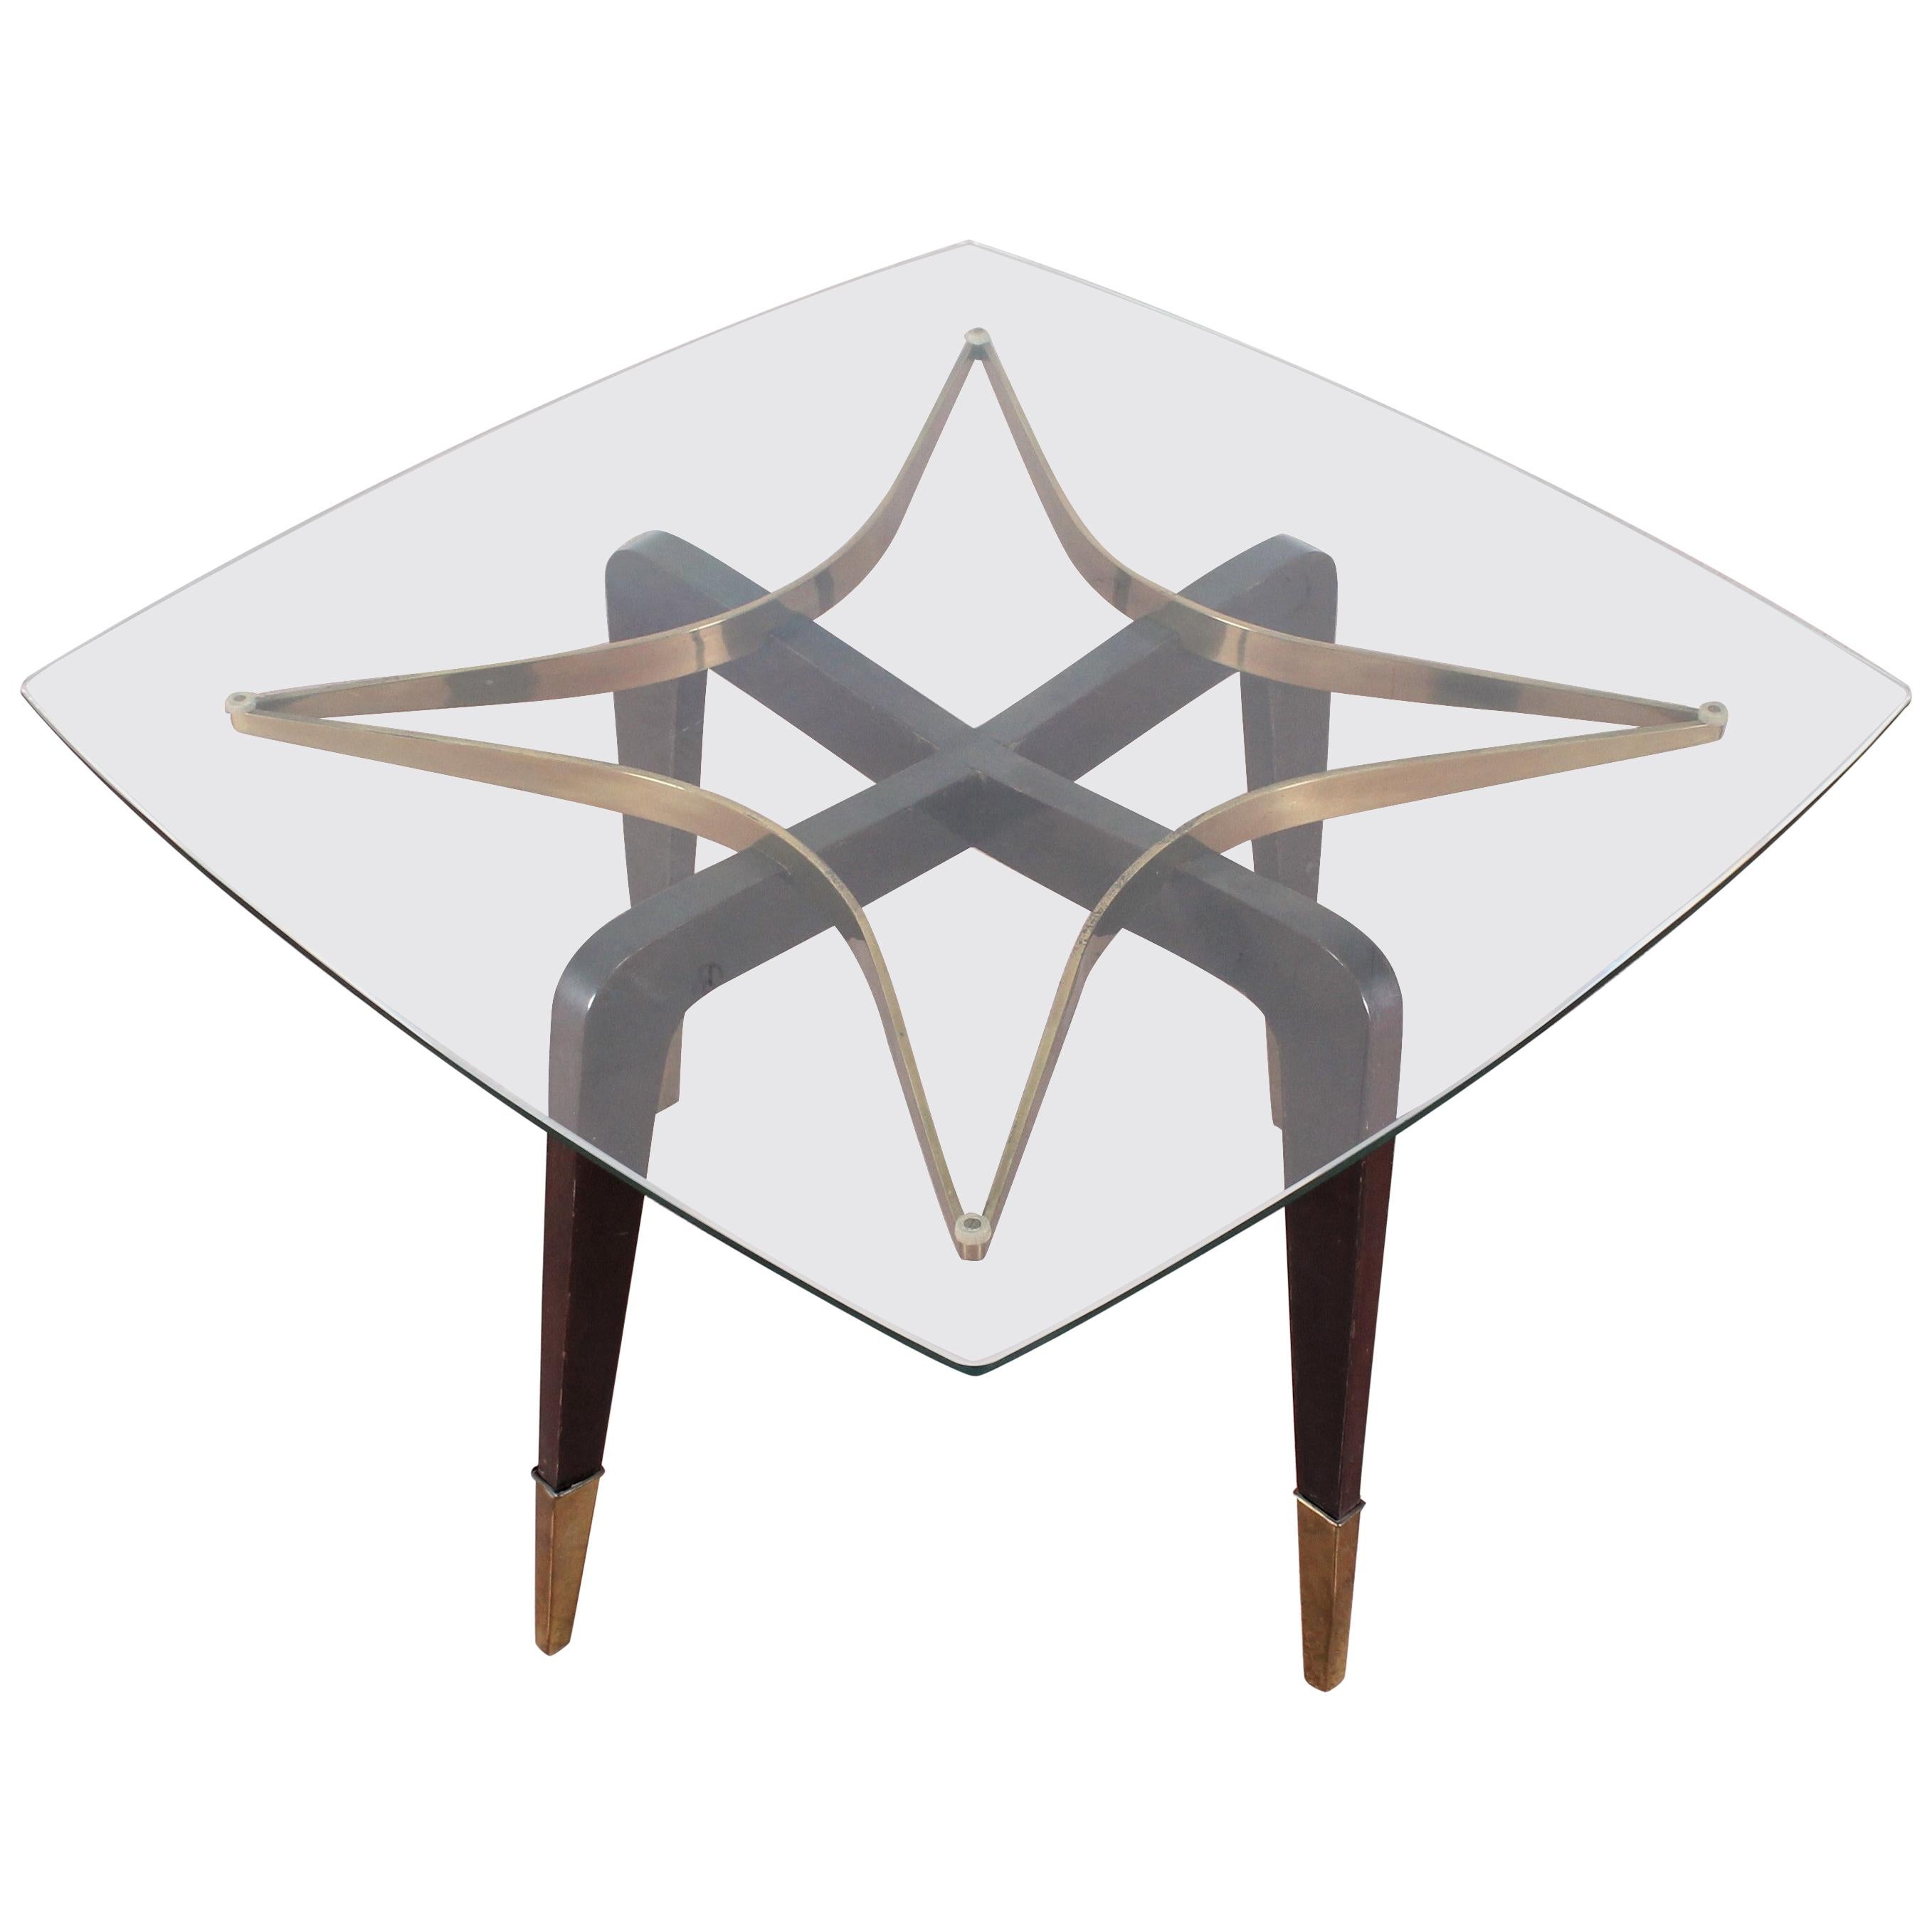 O. Borsani Midcentury Brass and Wood Square Coffee Table Glass Top, Italy, 1950s